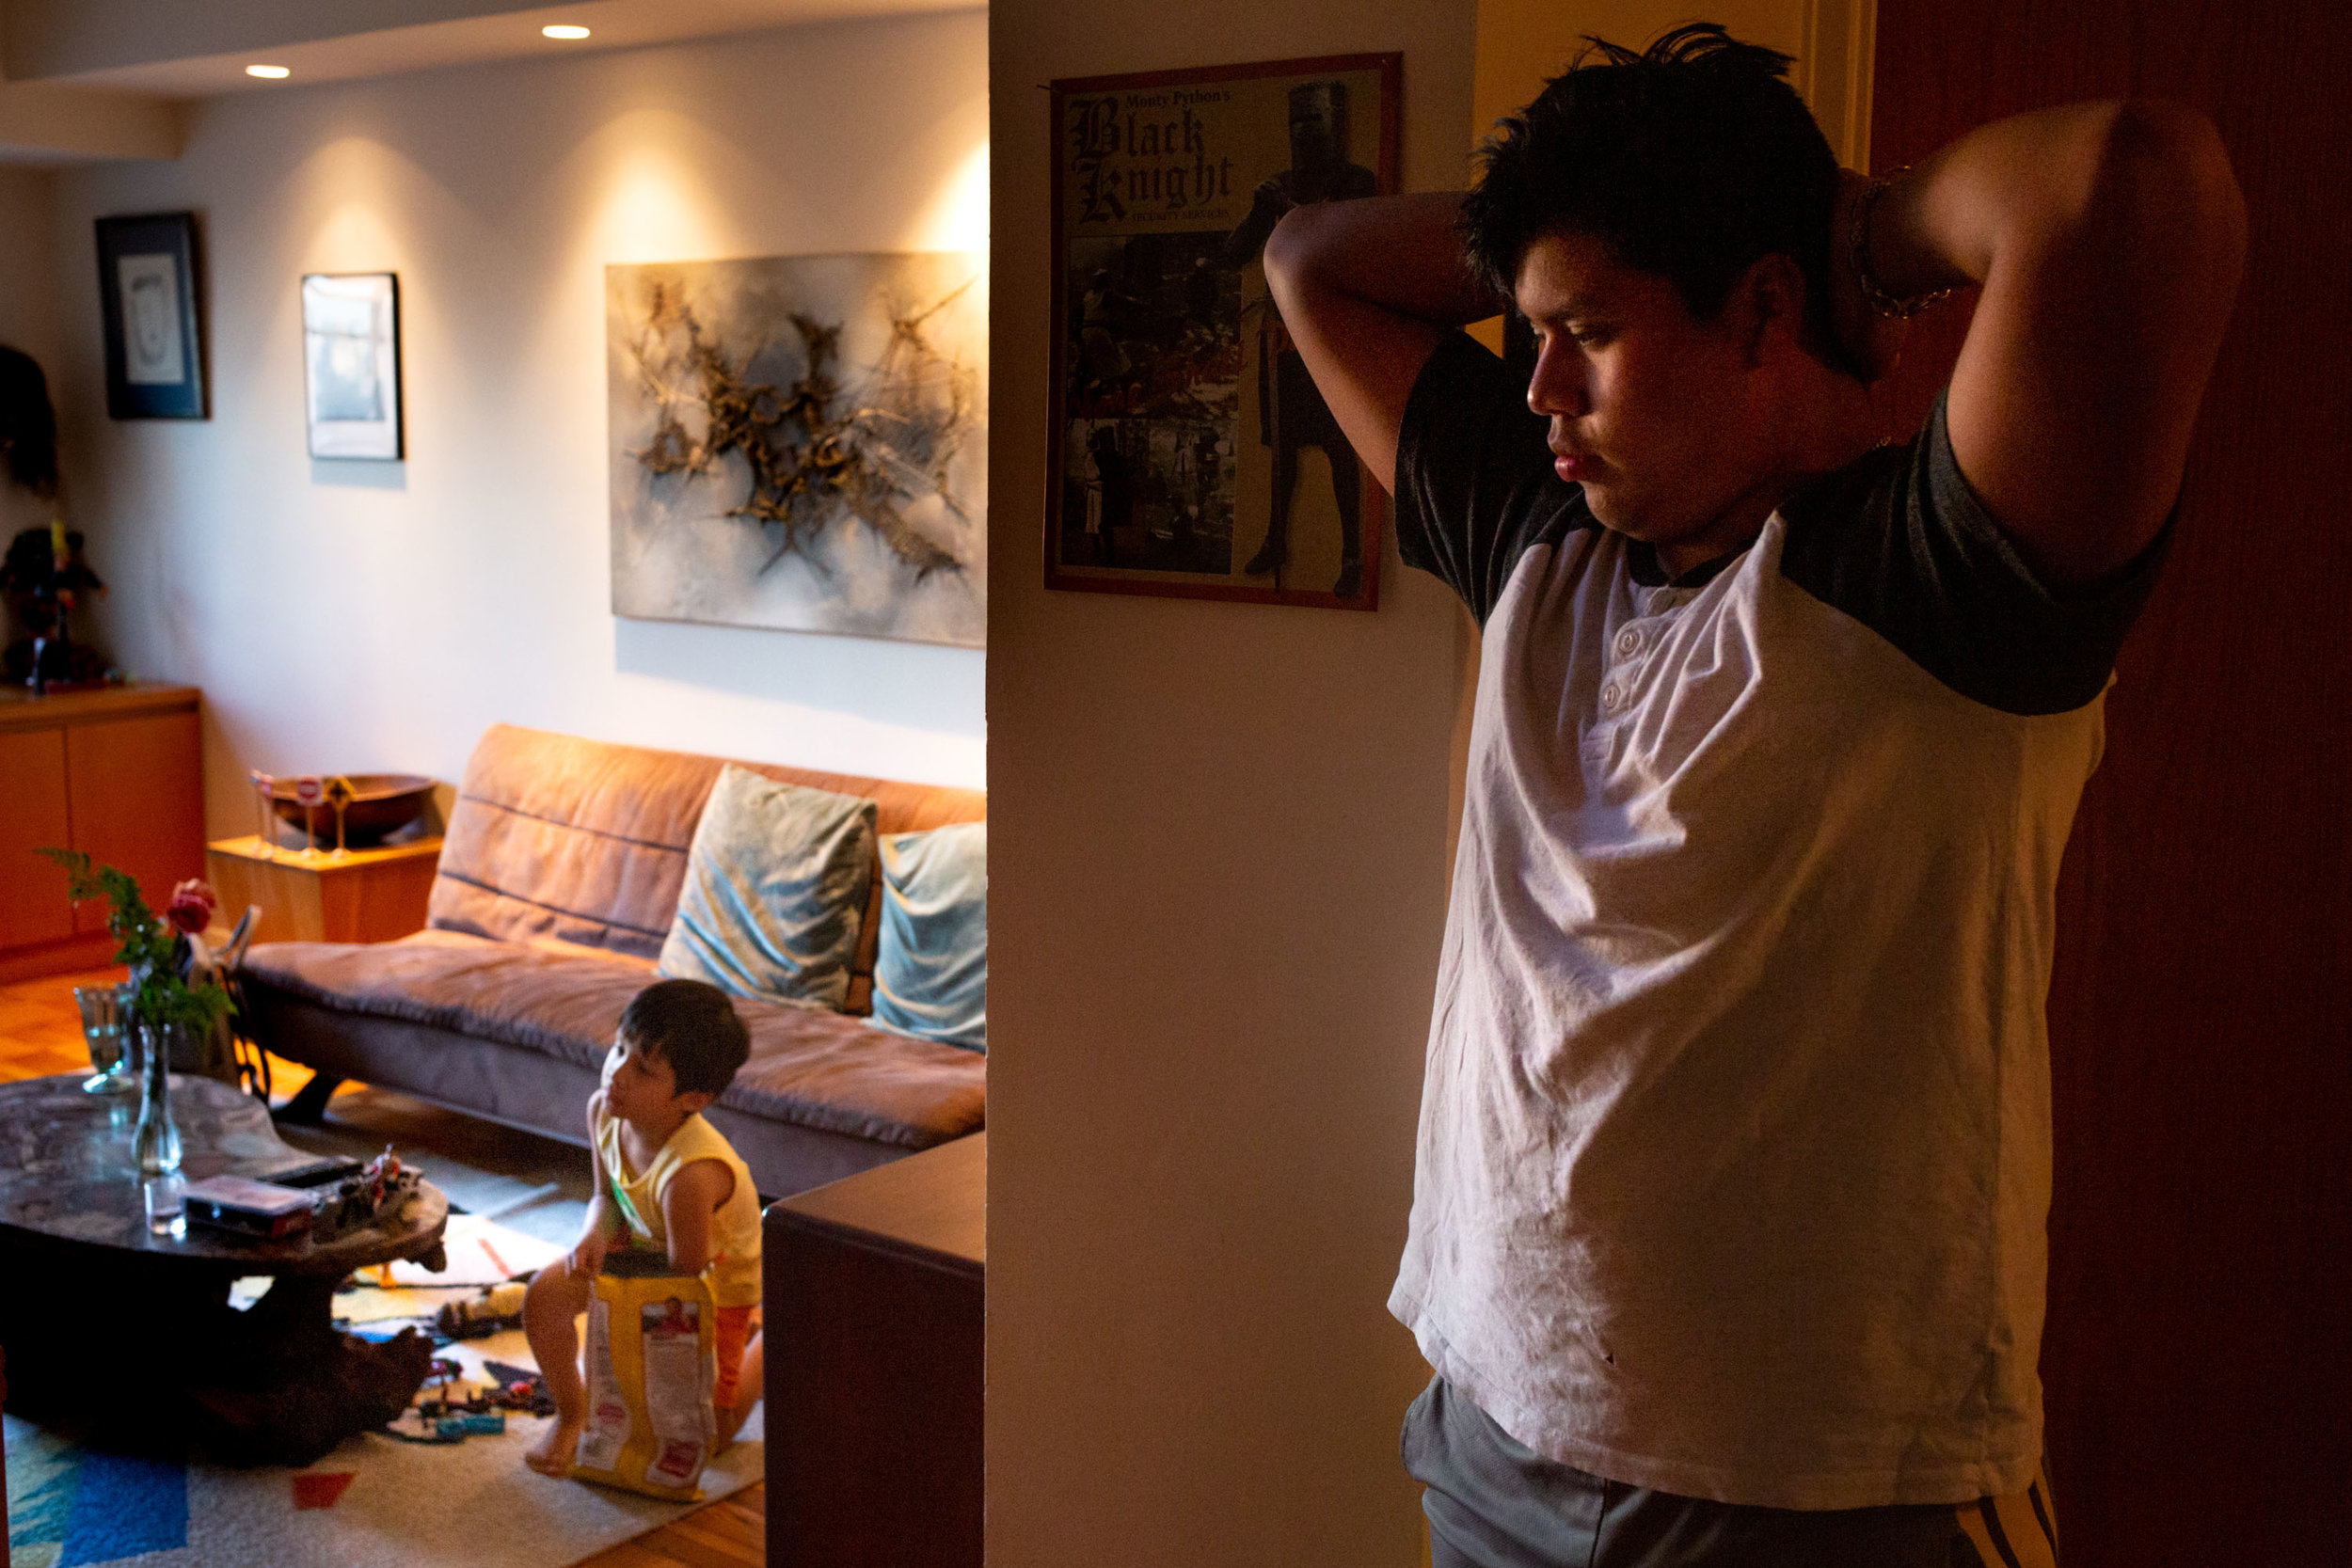  Yordy Michikoj, 16, watches as his brother Fernando, 6, watches television in their Upper East Side apartment in Manhattan. From Guatemala, the two boys were separated from their mother after crossing the U.S. Border to seek asylum as a result of th